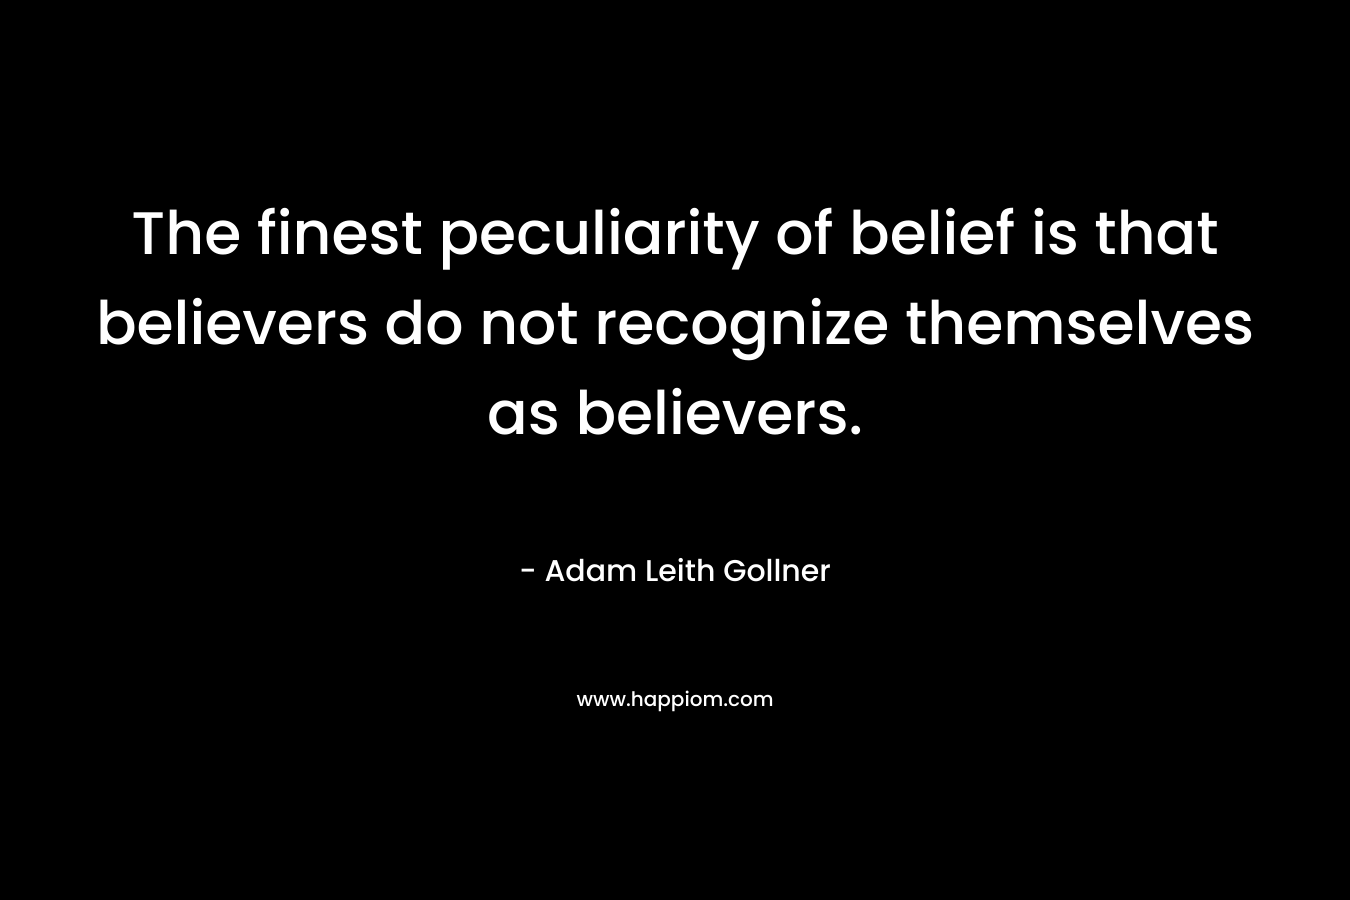 The finest peculiarity of belief is that believers do not recognize themselves as believers.